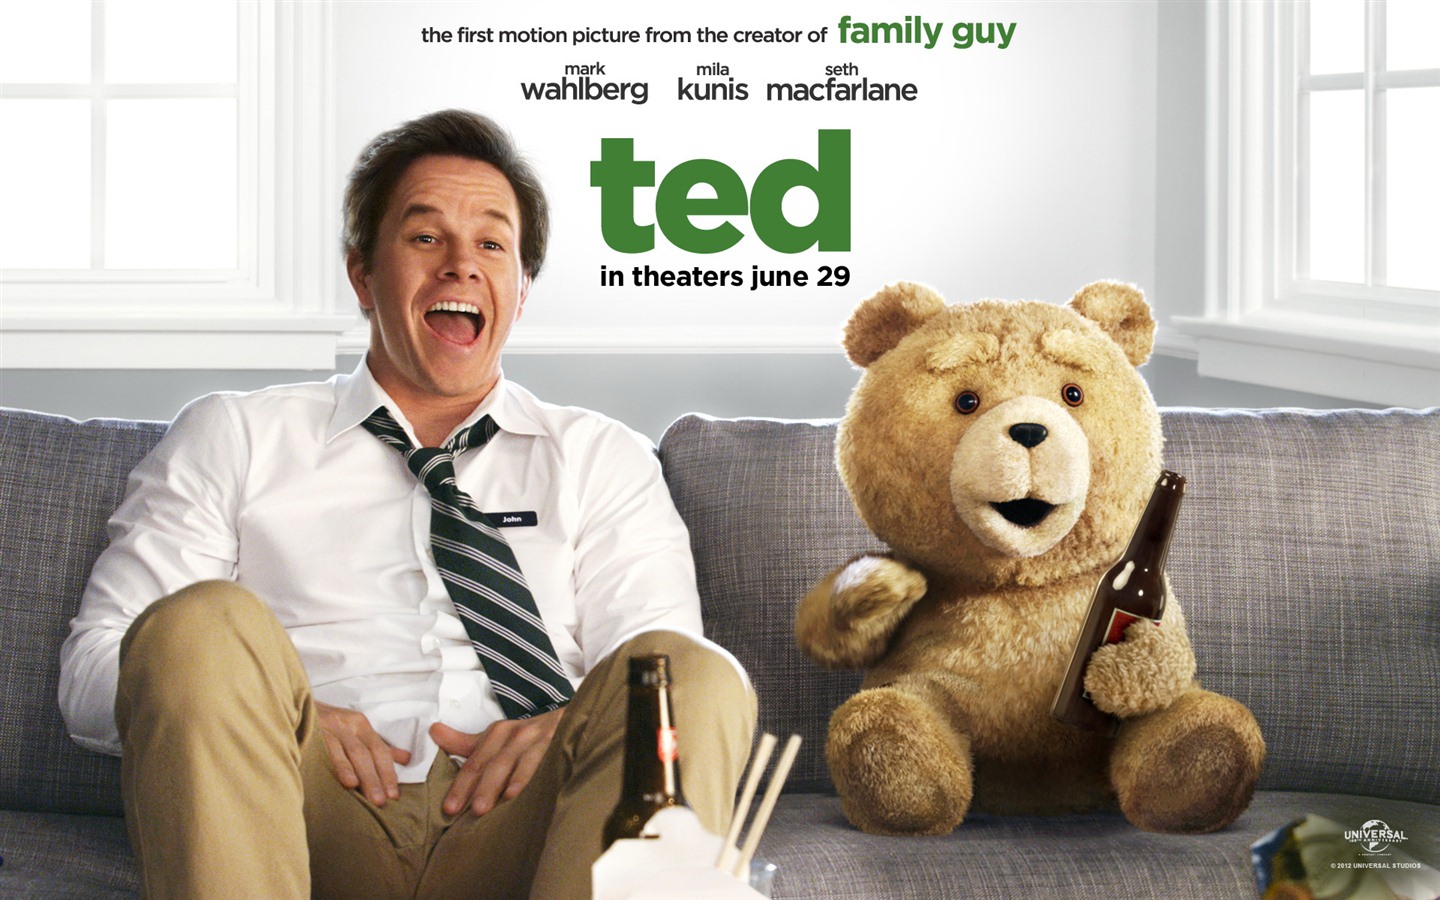 Ted 2012 HD movie wallpapers #1 - 1440x900